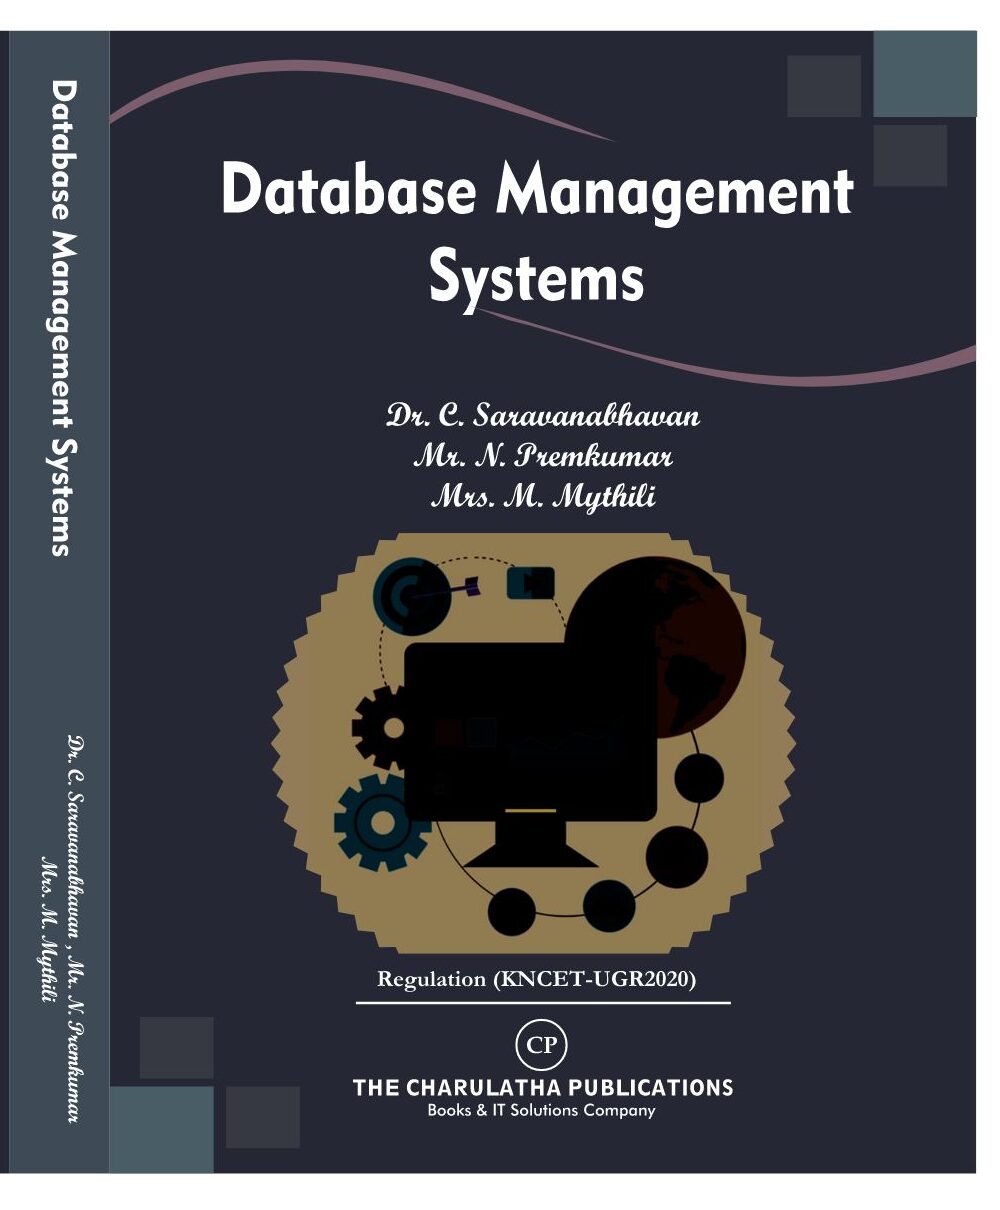 The charulatha publications Database management systems